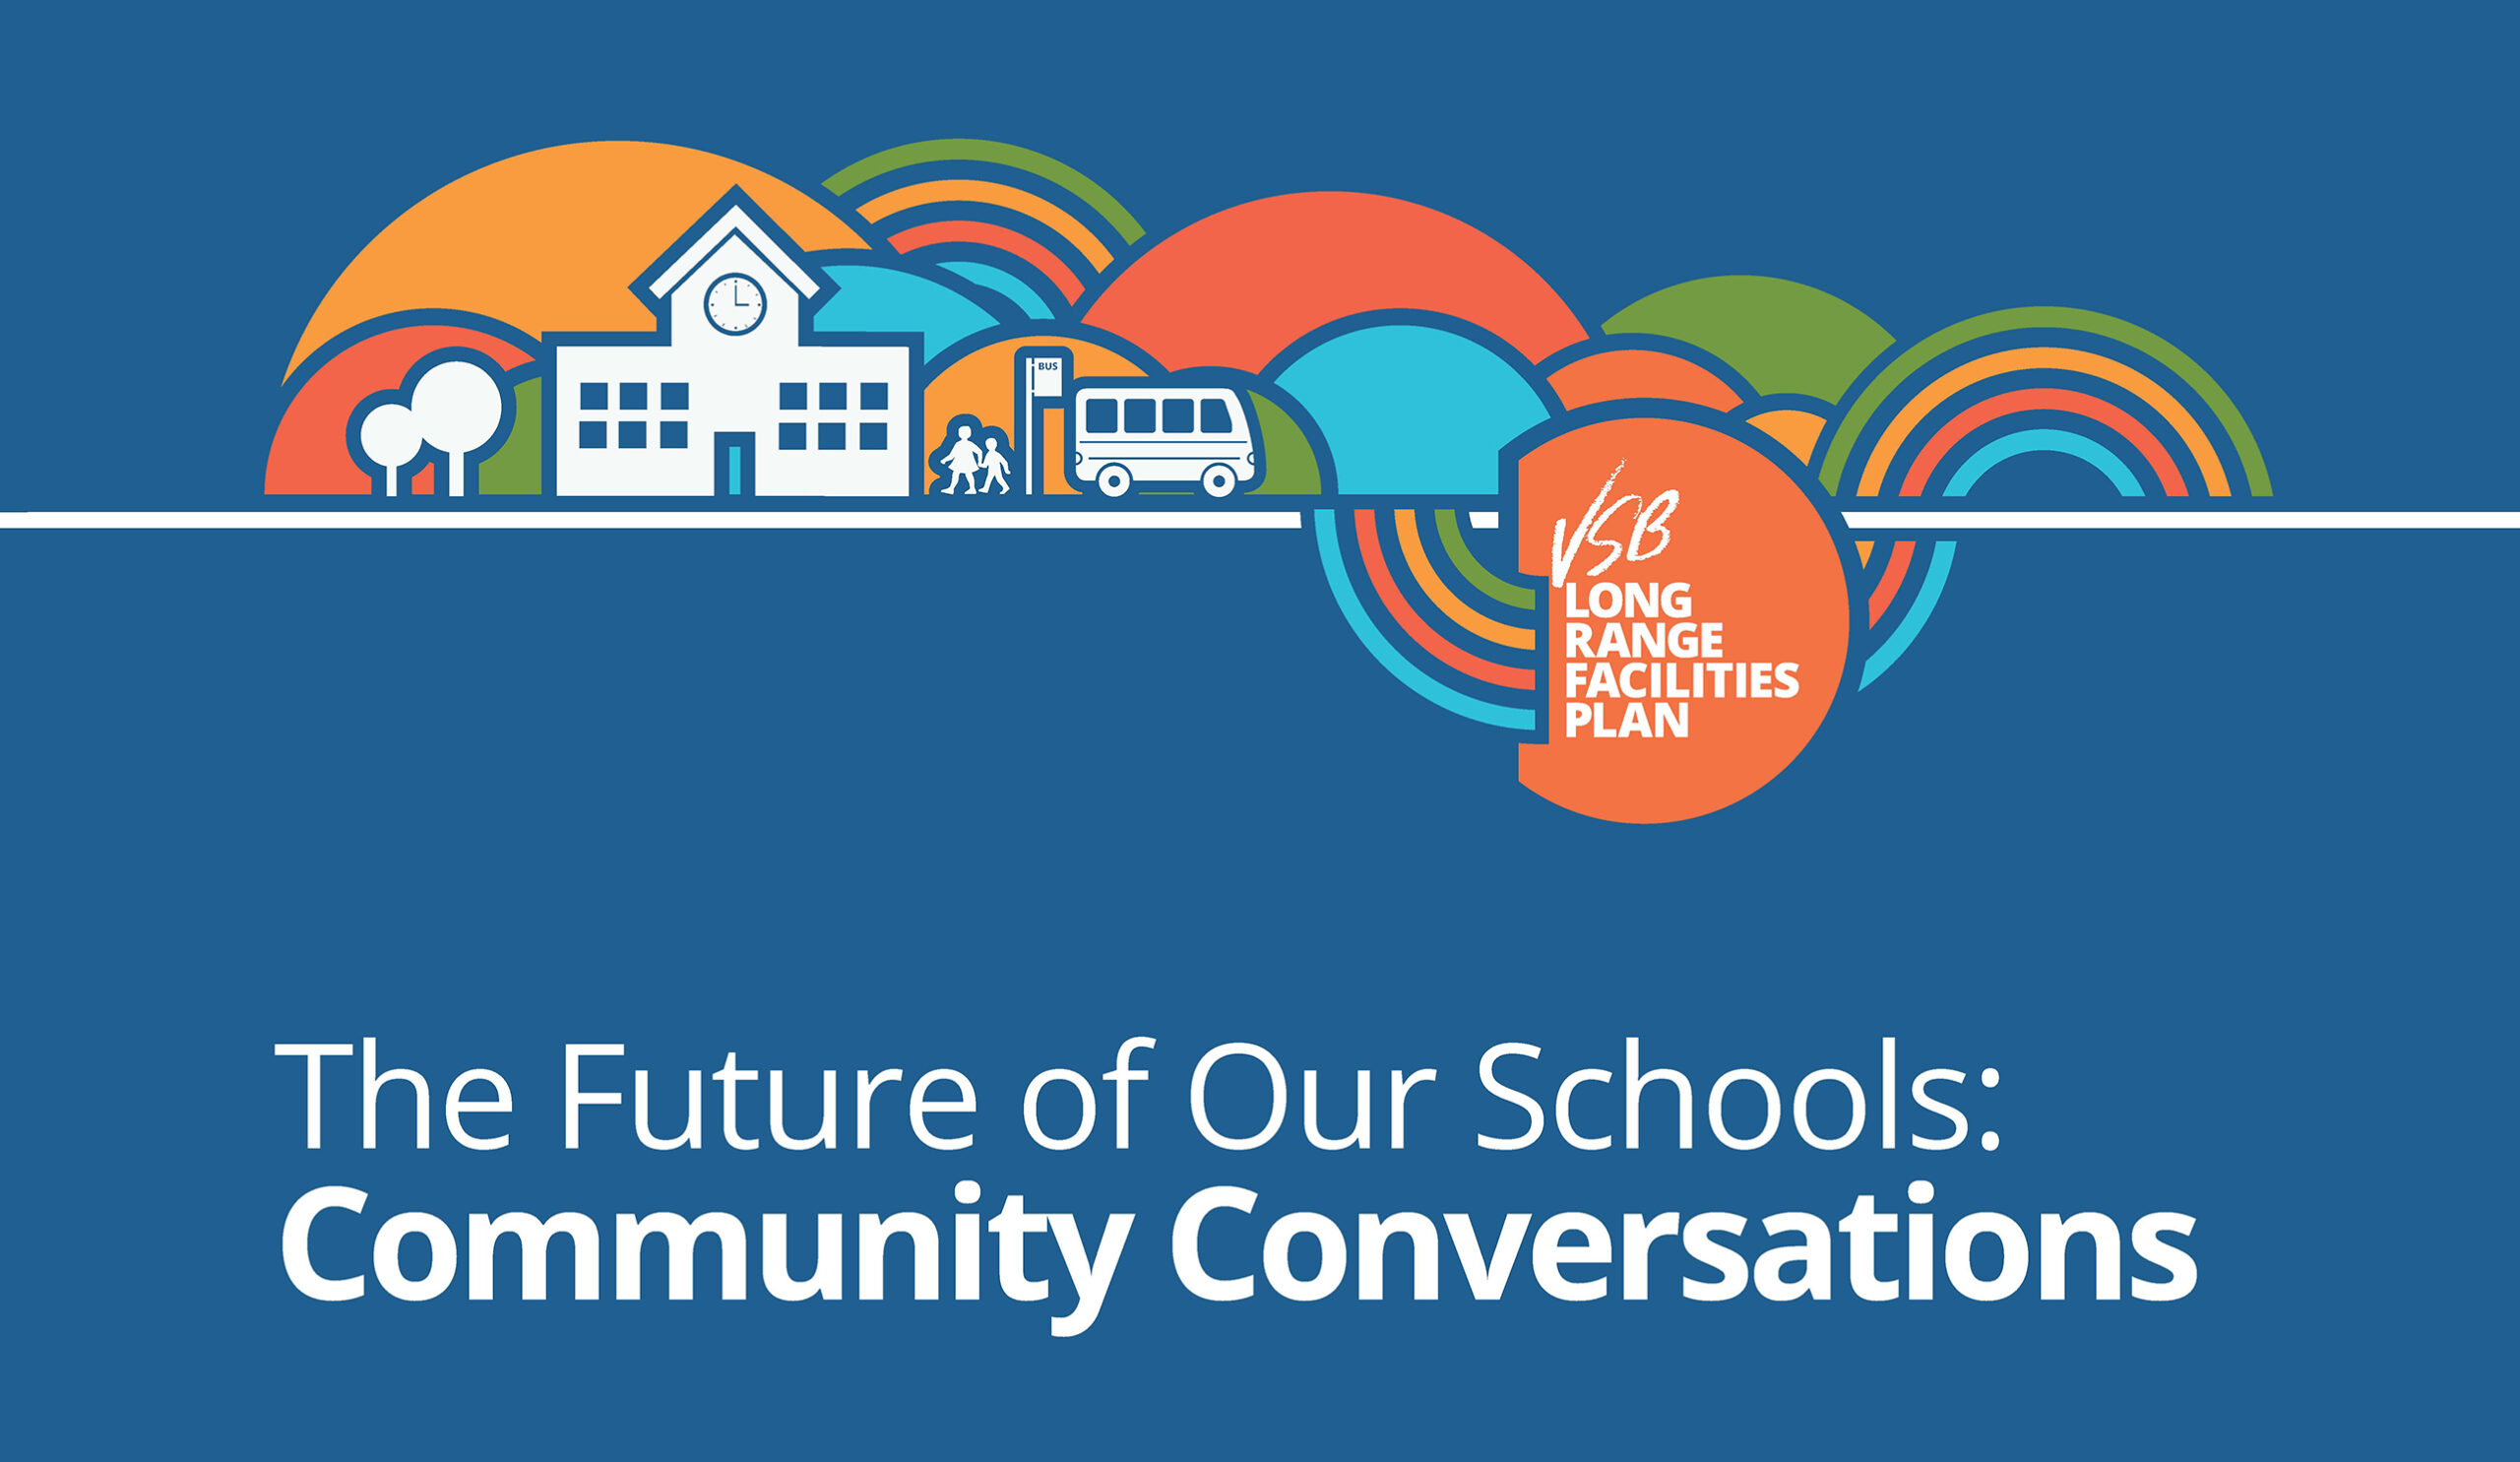 Graphic illustration of a school with circular shapes and rainbows behind it. Below there is text saying: "The Future of Our Schools: Community Conversations"